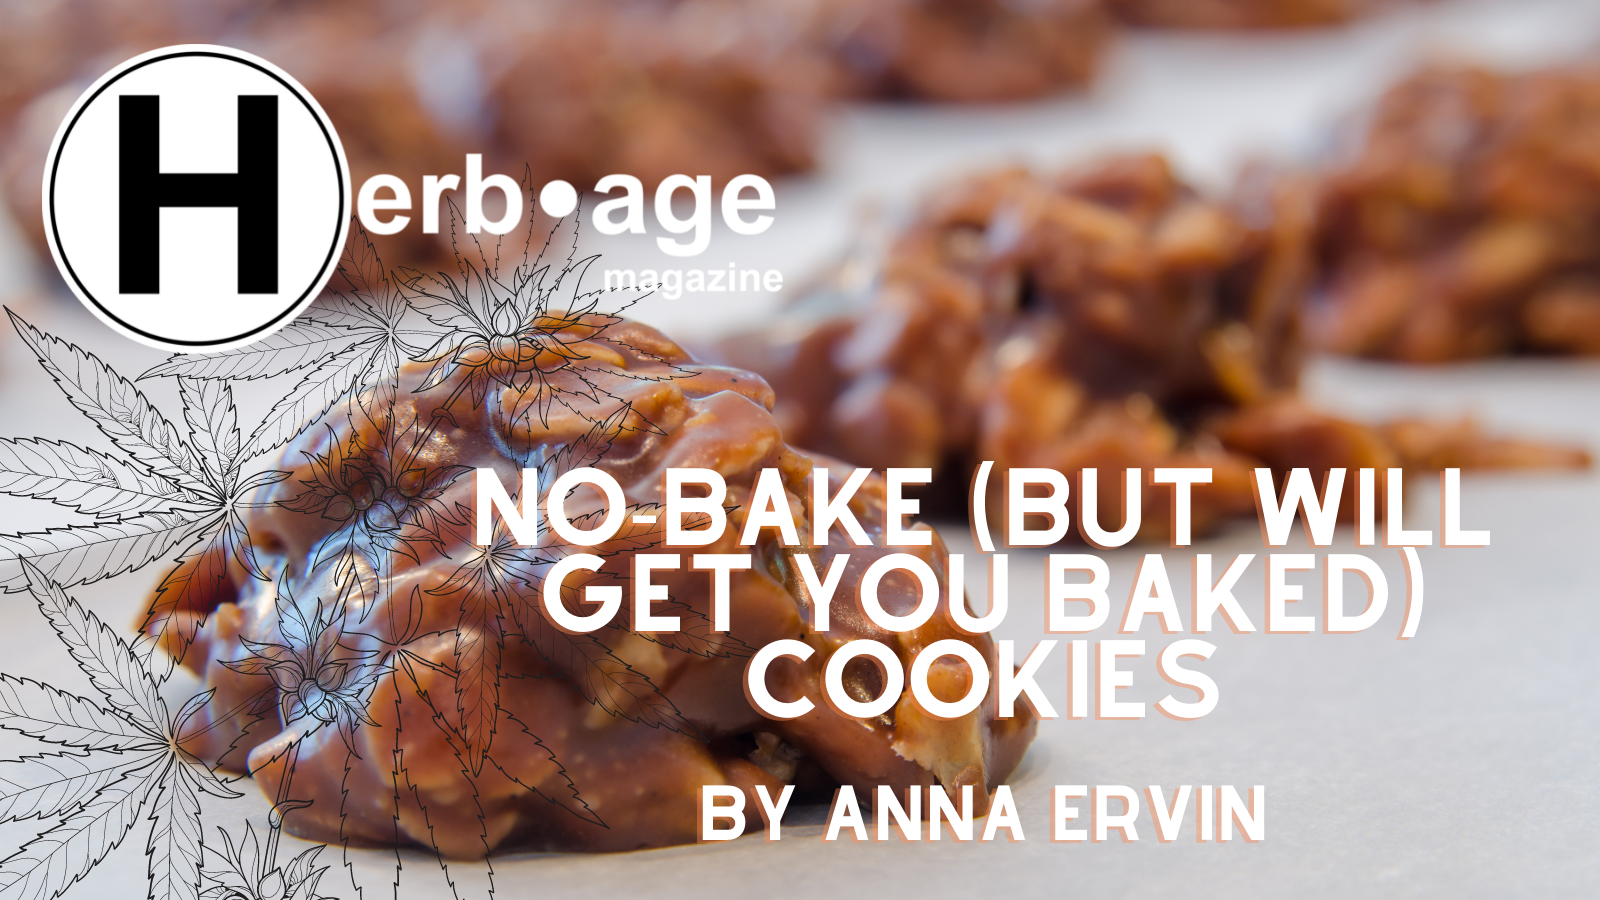 No-Bake (but will get you baked) Cookies